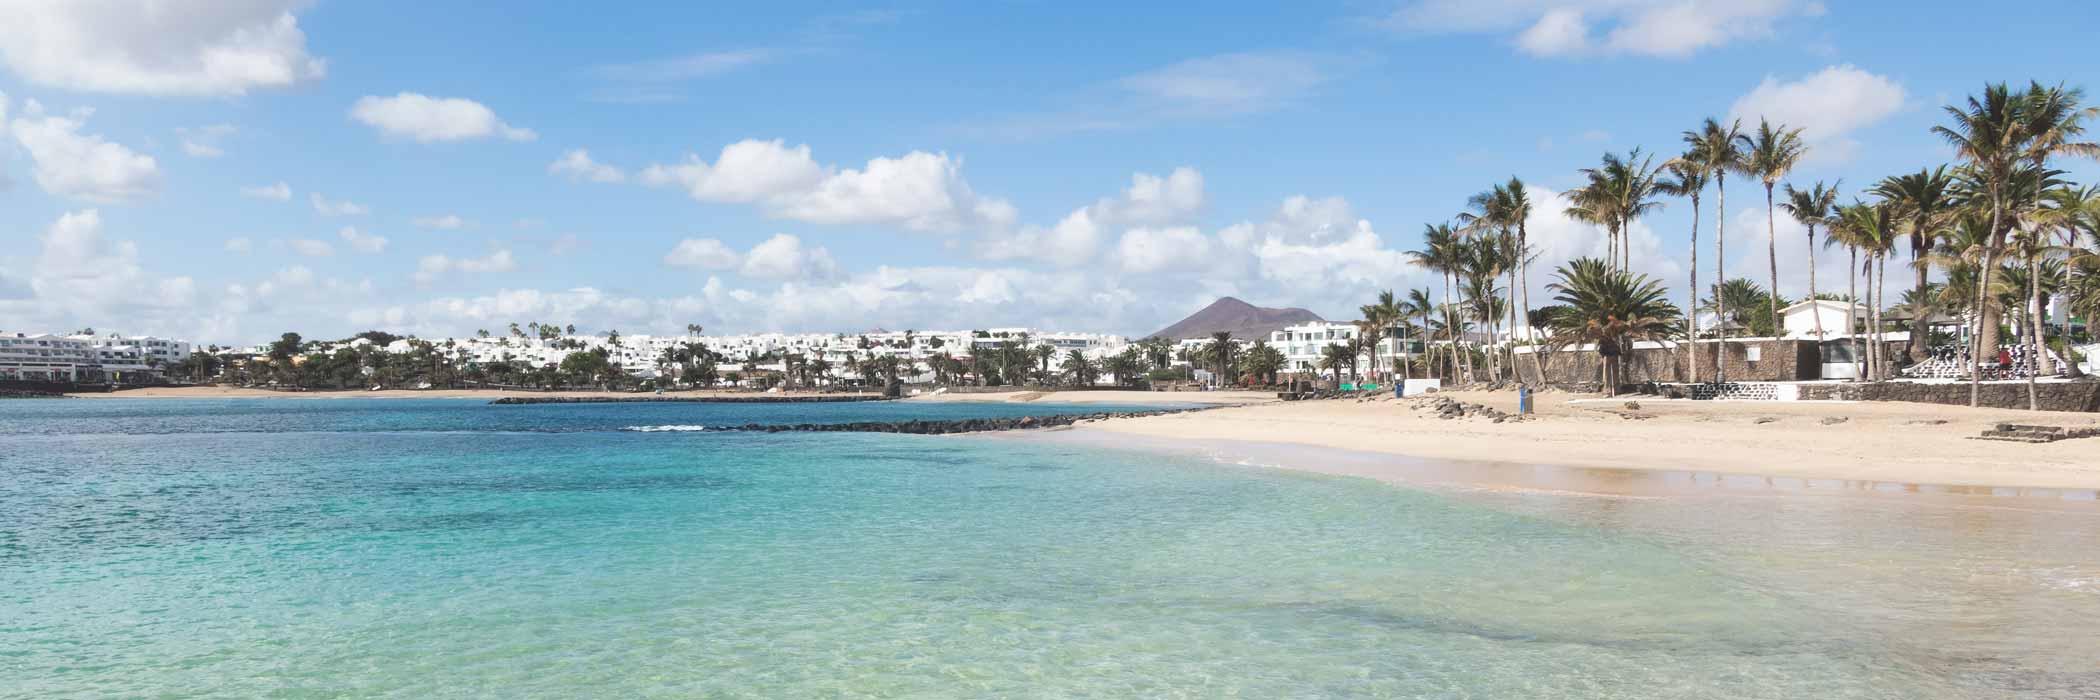 All inclusive holidays in Lanzarote